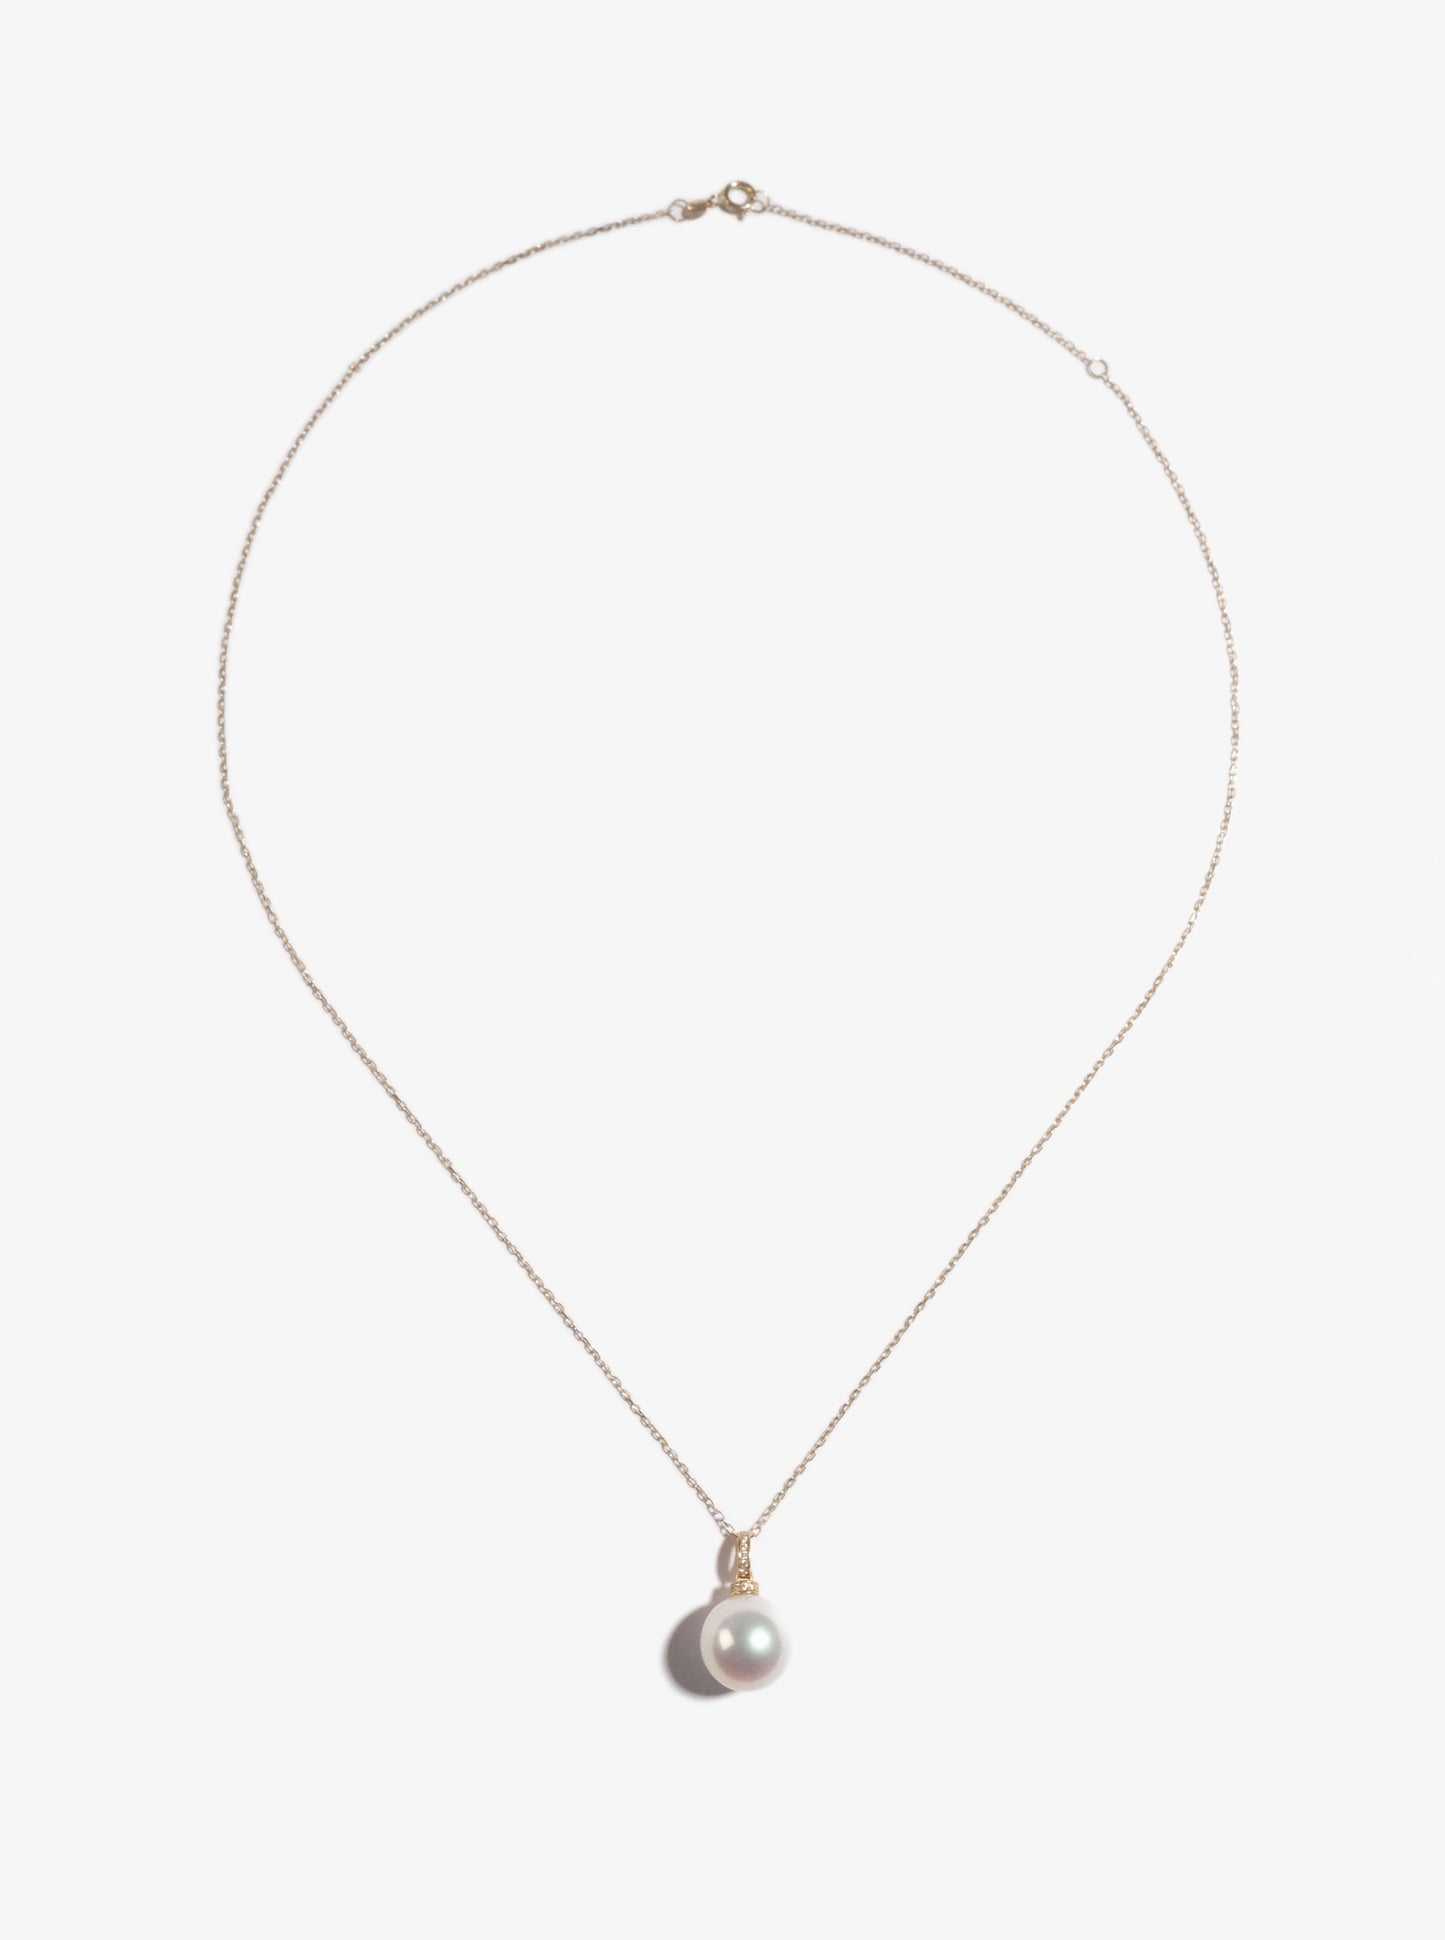 Freshwater Pearl Pendant With 18K Gold  FP18K30